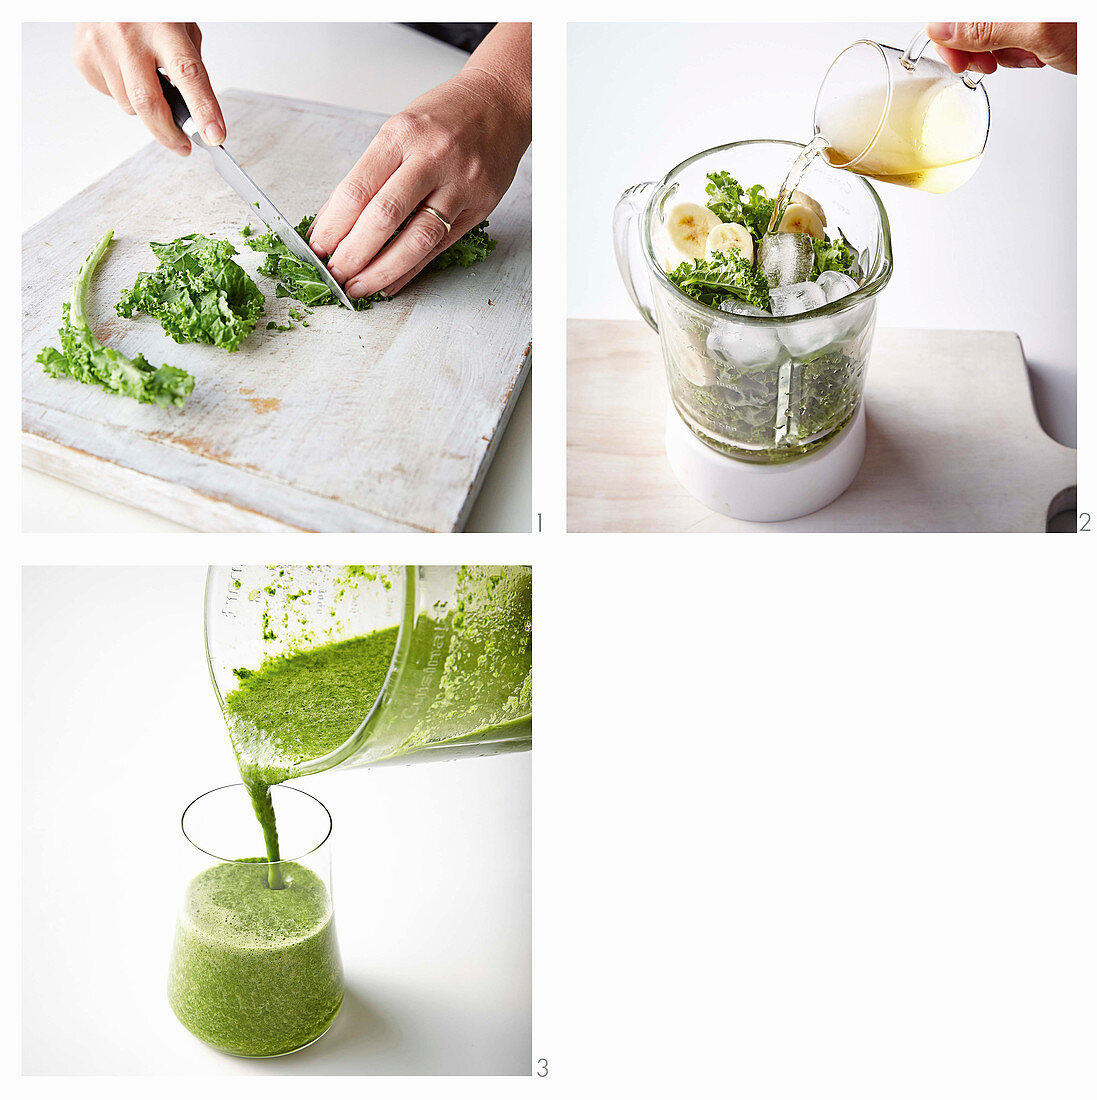 How to make a quick kale smoothie